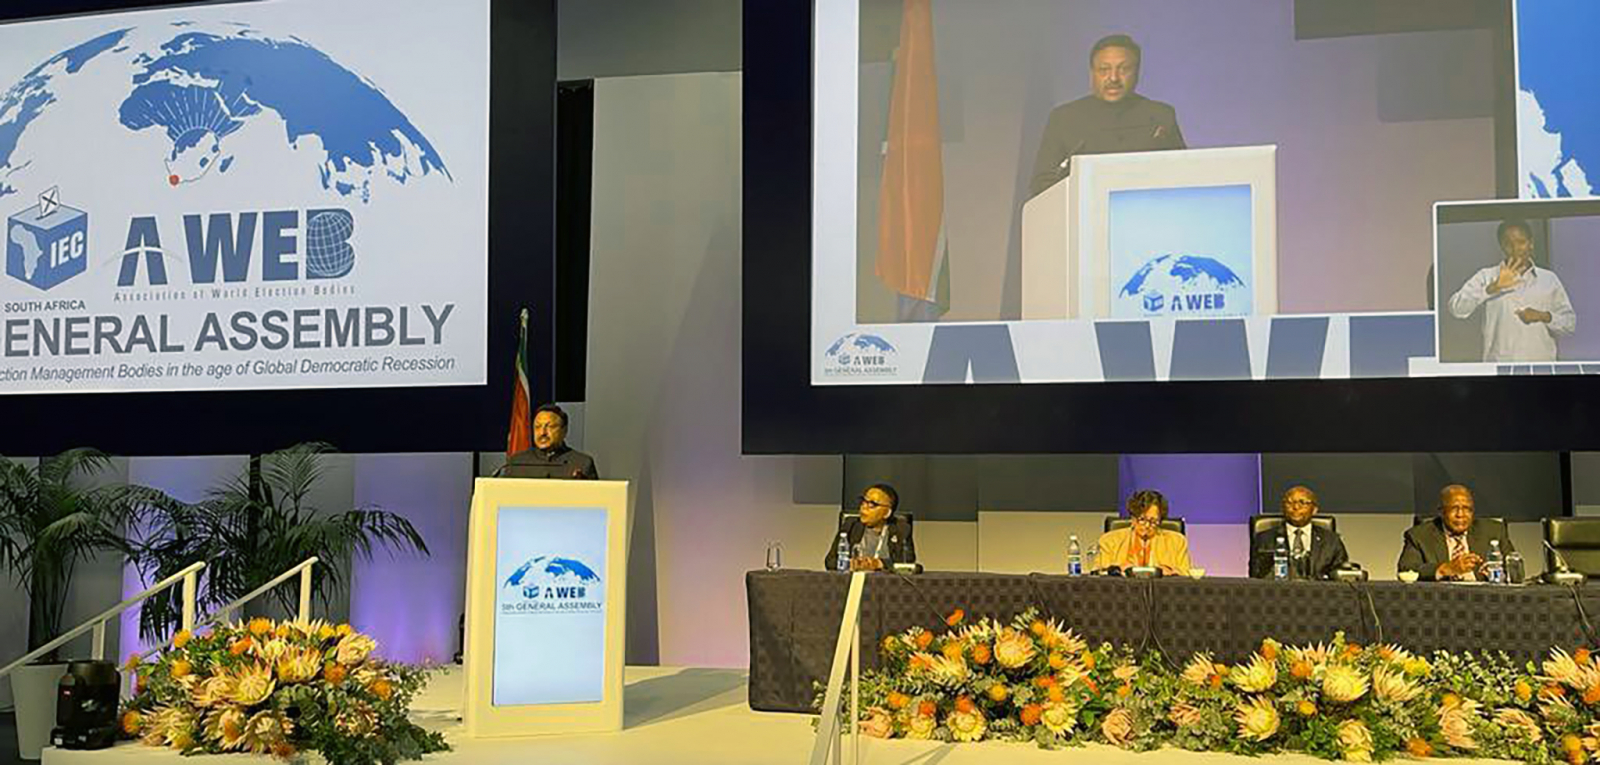 CEC Shri Rajiv Kumar delivered keynote address as Chairperson AWEB at the opening ceremony of the 5th General Assembly of AWEB on October 19, 2022 at Cape town, South Africa. On the occassion also handed over the AWEB Flag to Electoral Commission of South